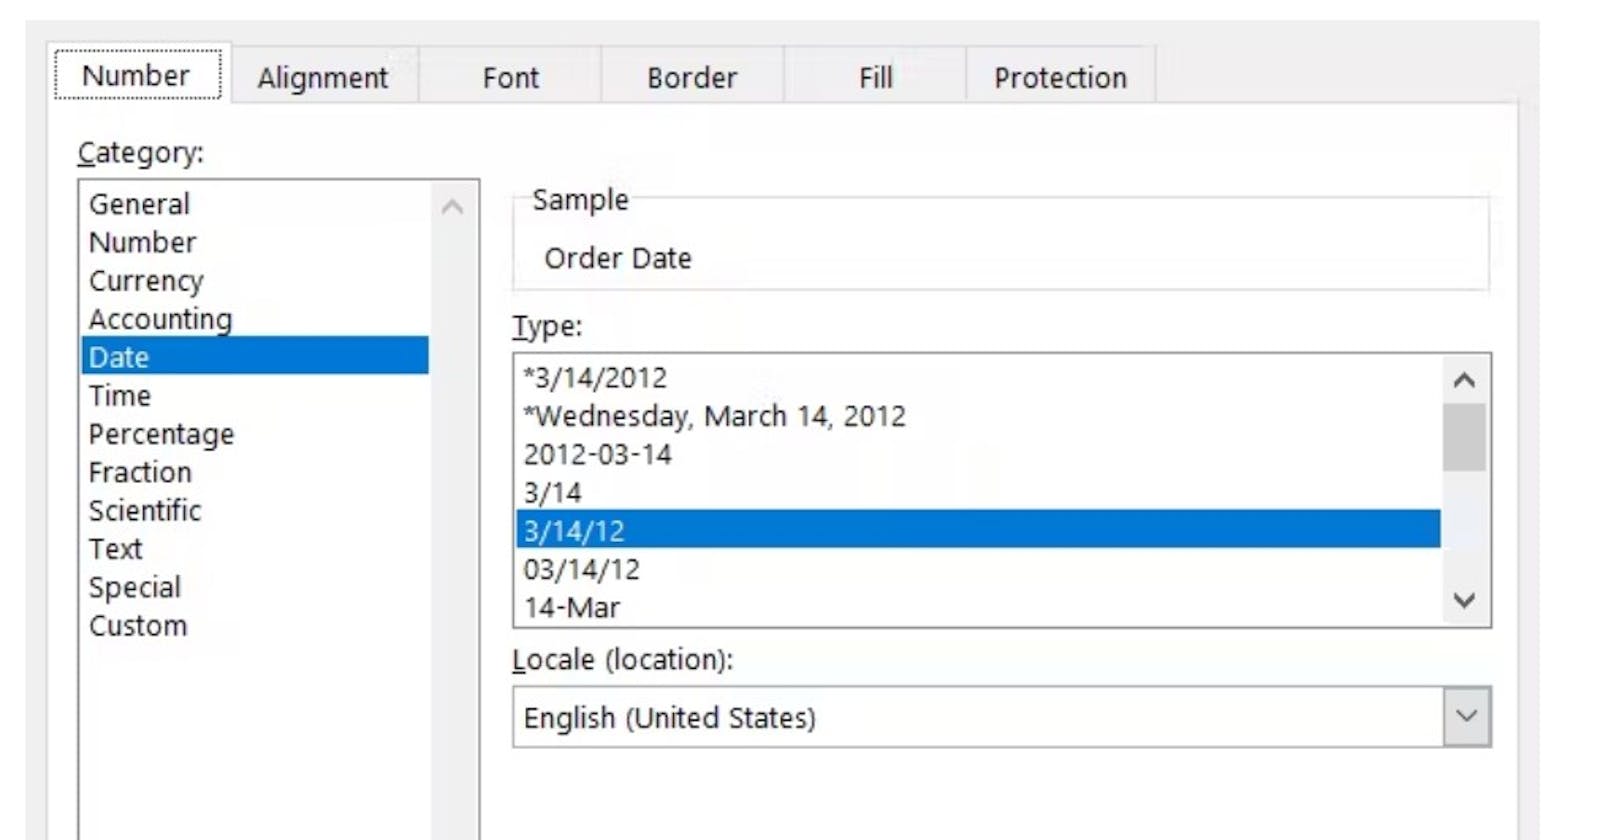 How to deal with problems in Date when importing  Excel file to Power BI ?